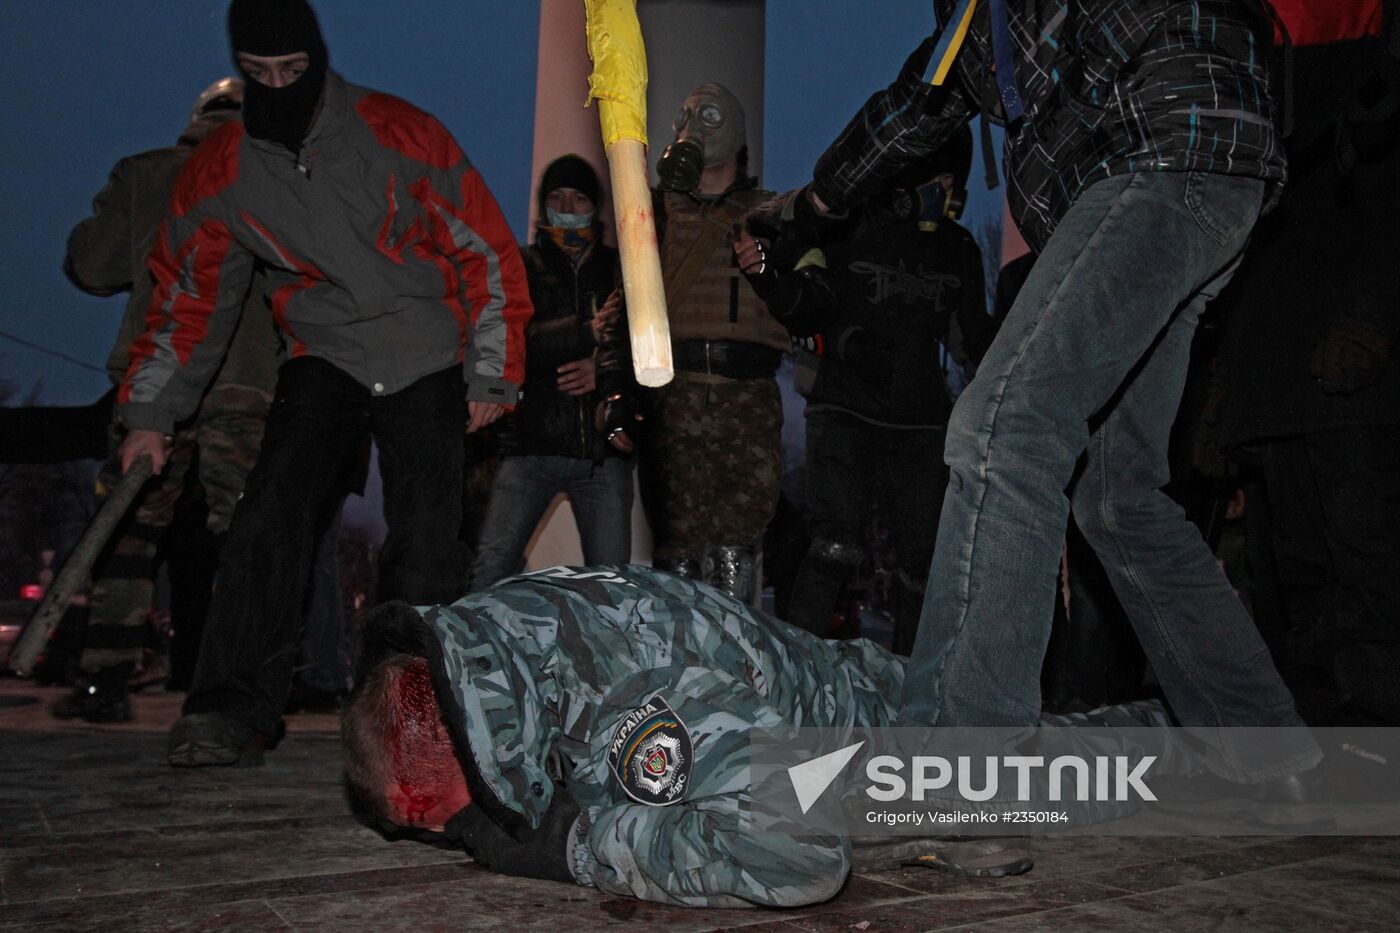 Standoff between protesters and police in Kiev